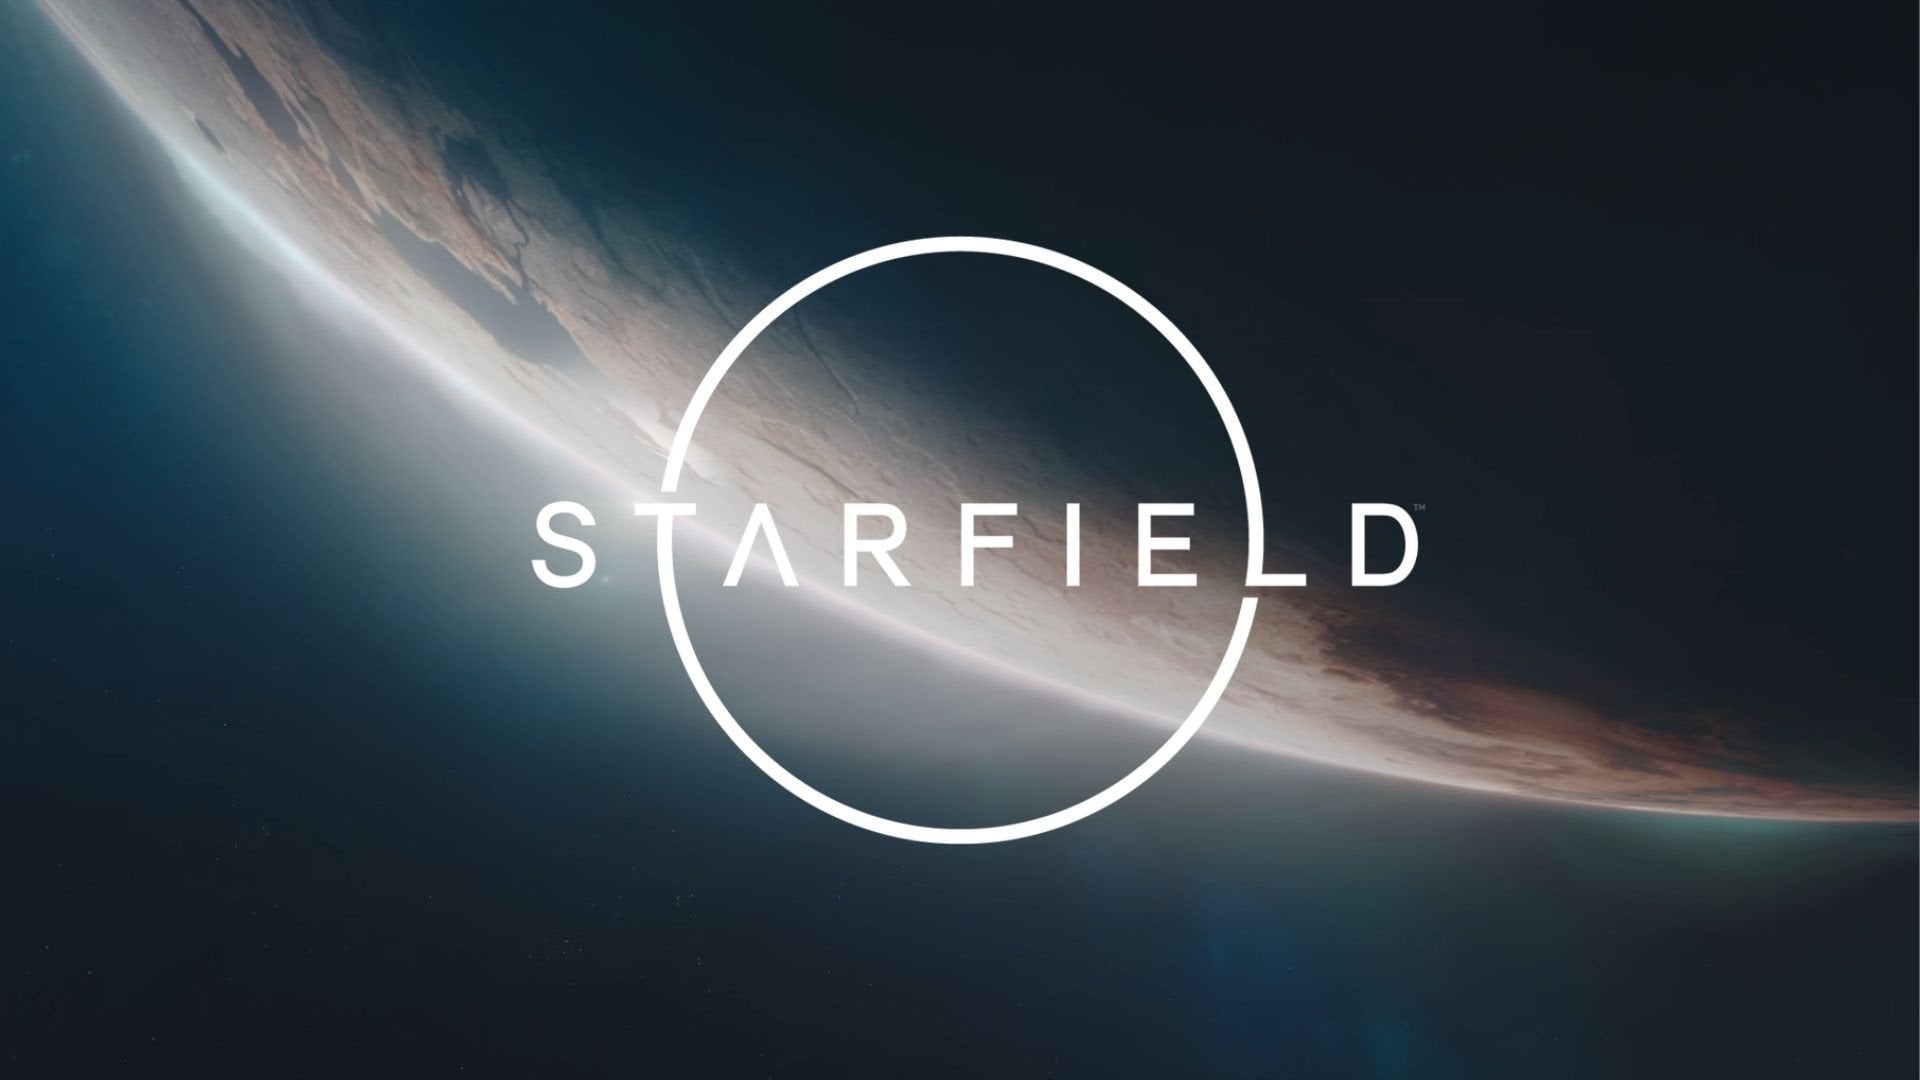 Free download Starfield Bethesdas Next Game Looks Like a Sci Fi Epic Gameranx [1920x1080] for your Desktop, Mobile & Tablet. Explore Starfield HD Wallpaper. Snow Wallpaper Hd, Naruto Wallpaper